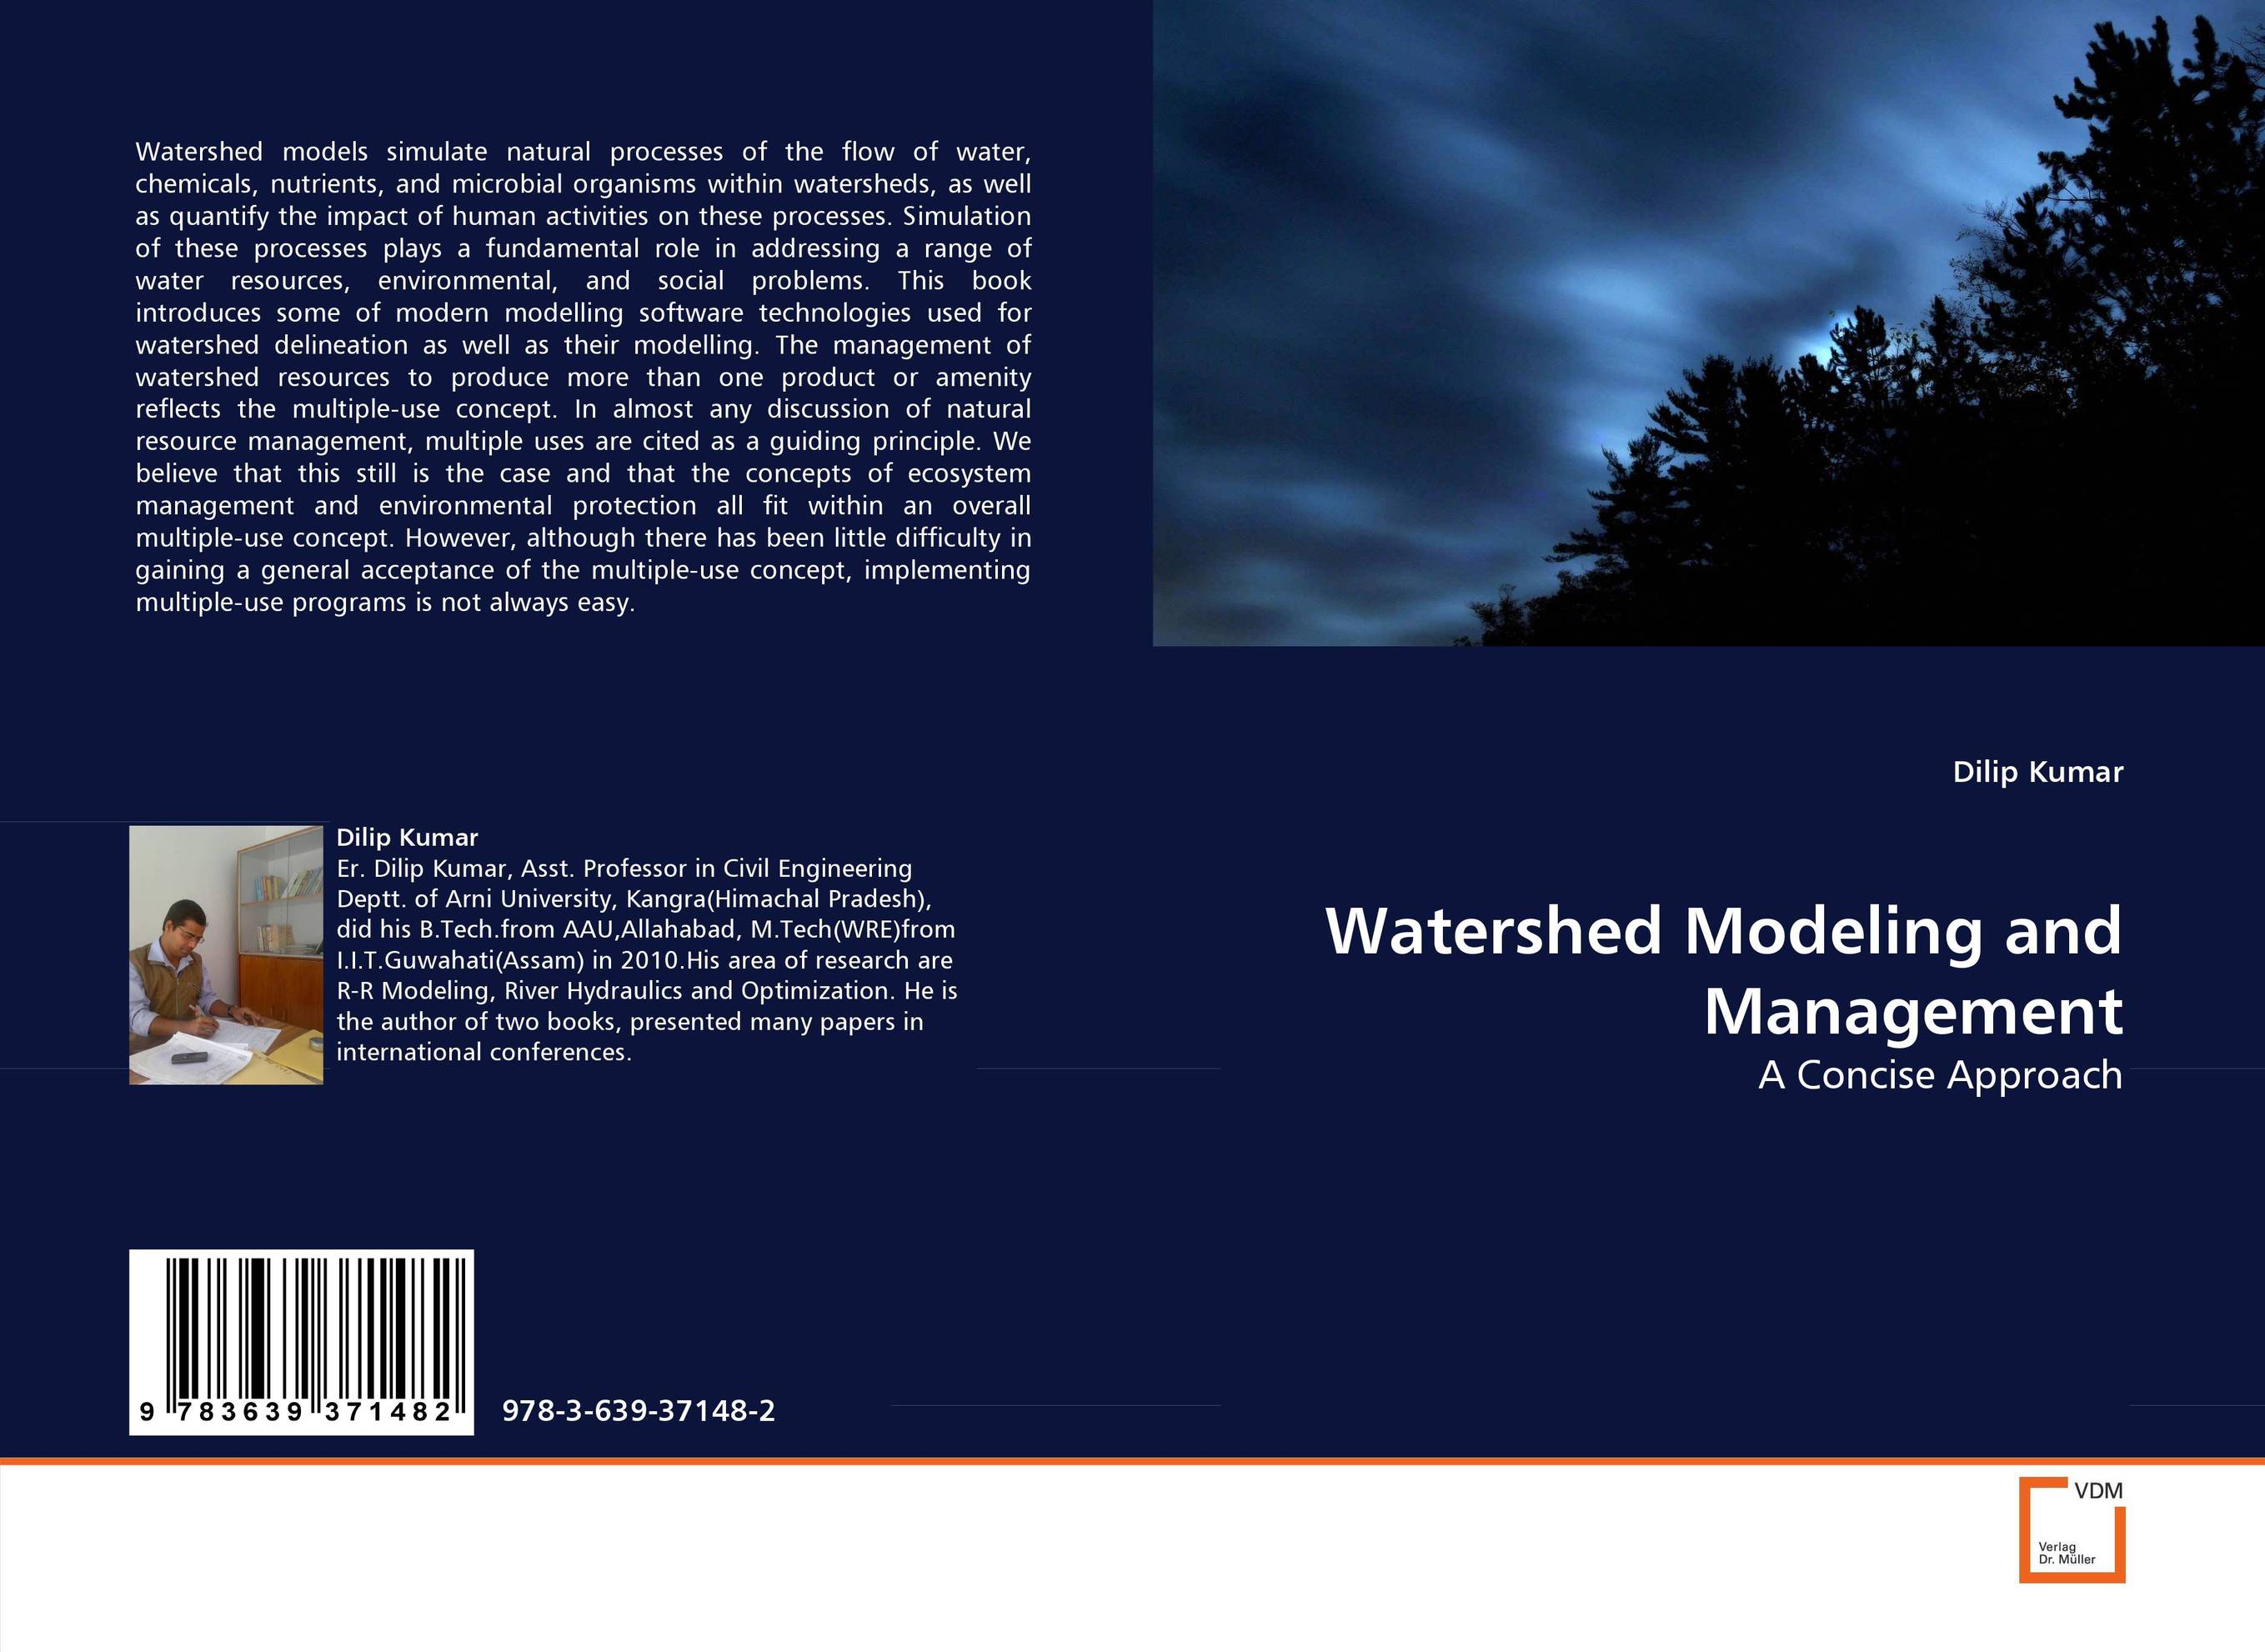 Watershed Modeling and Management